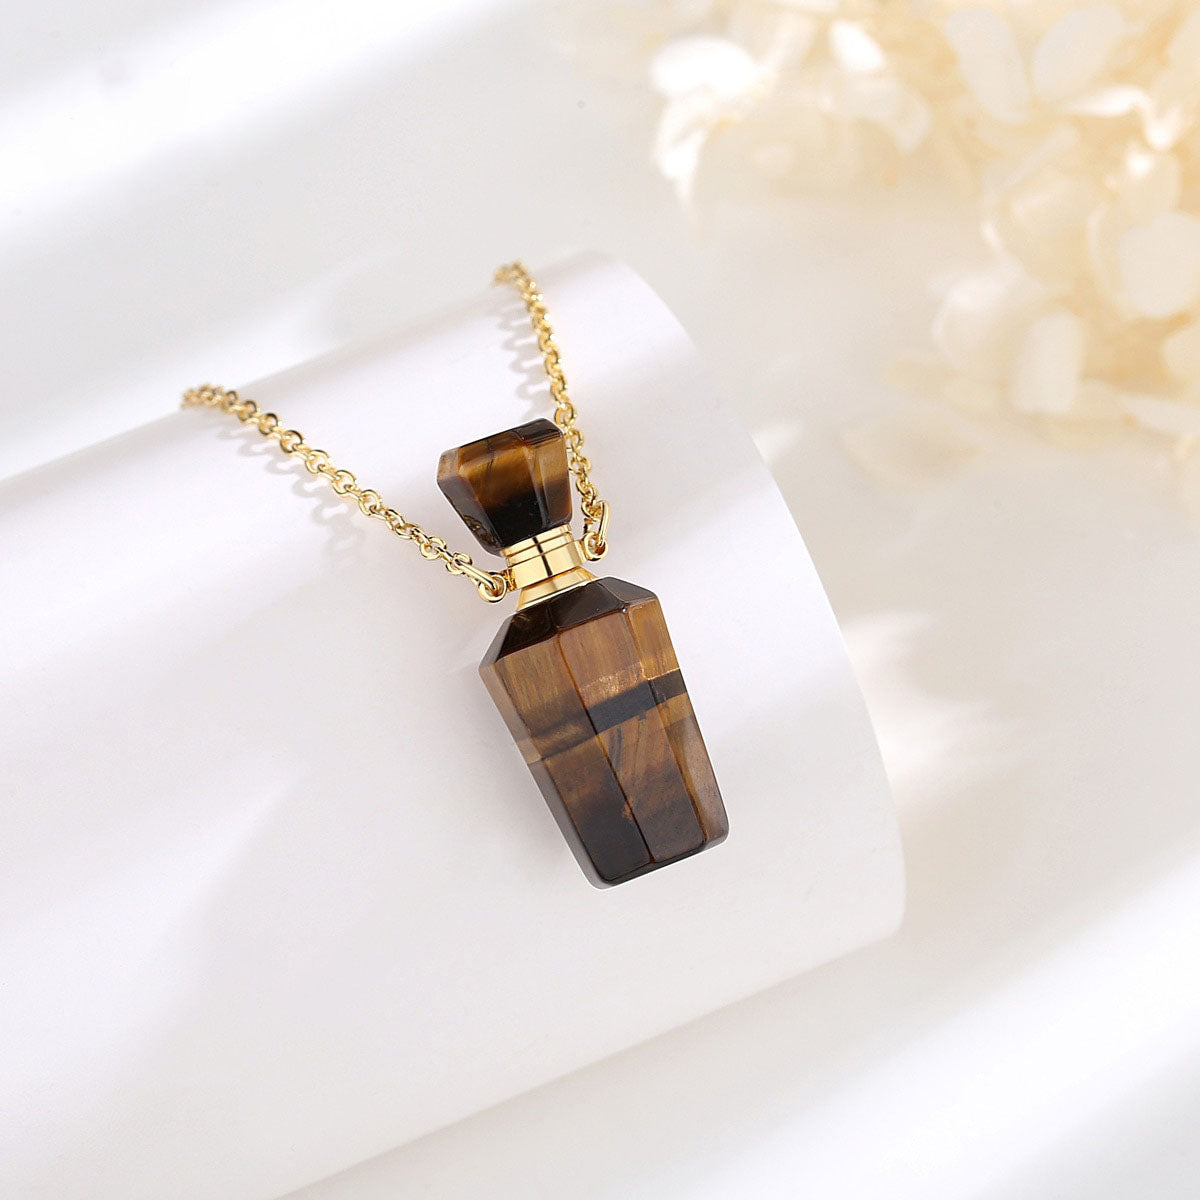 Tiger Stone Eye Crystal Healing Stone Necklace